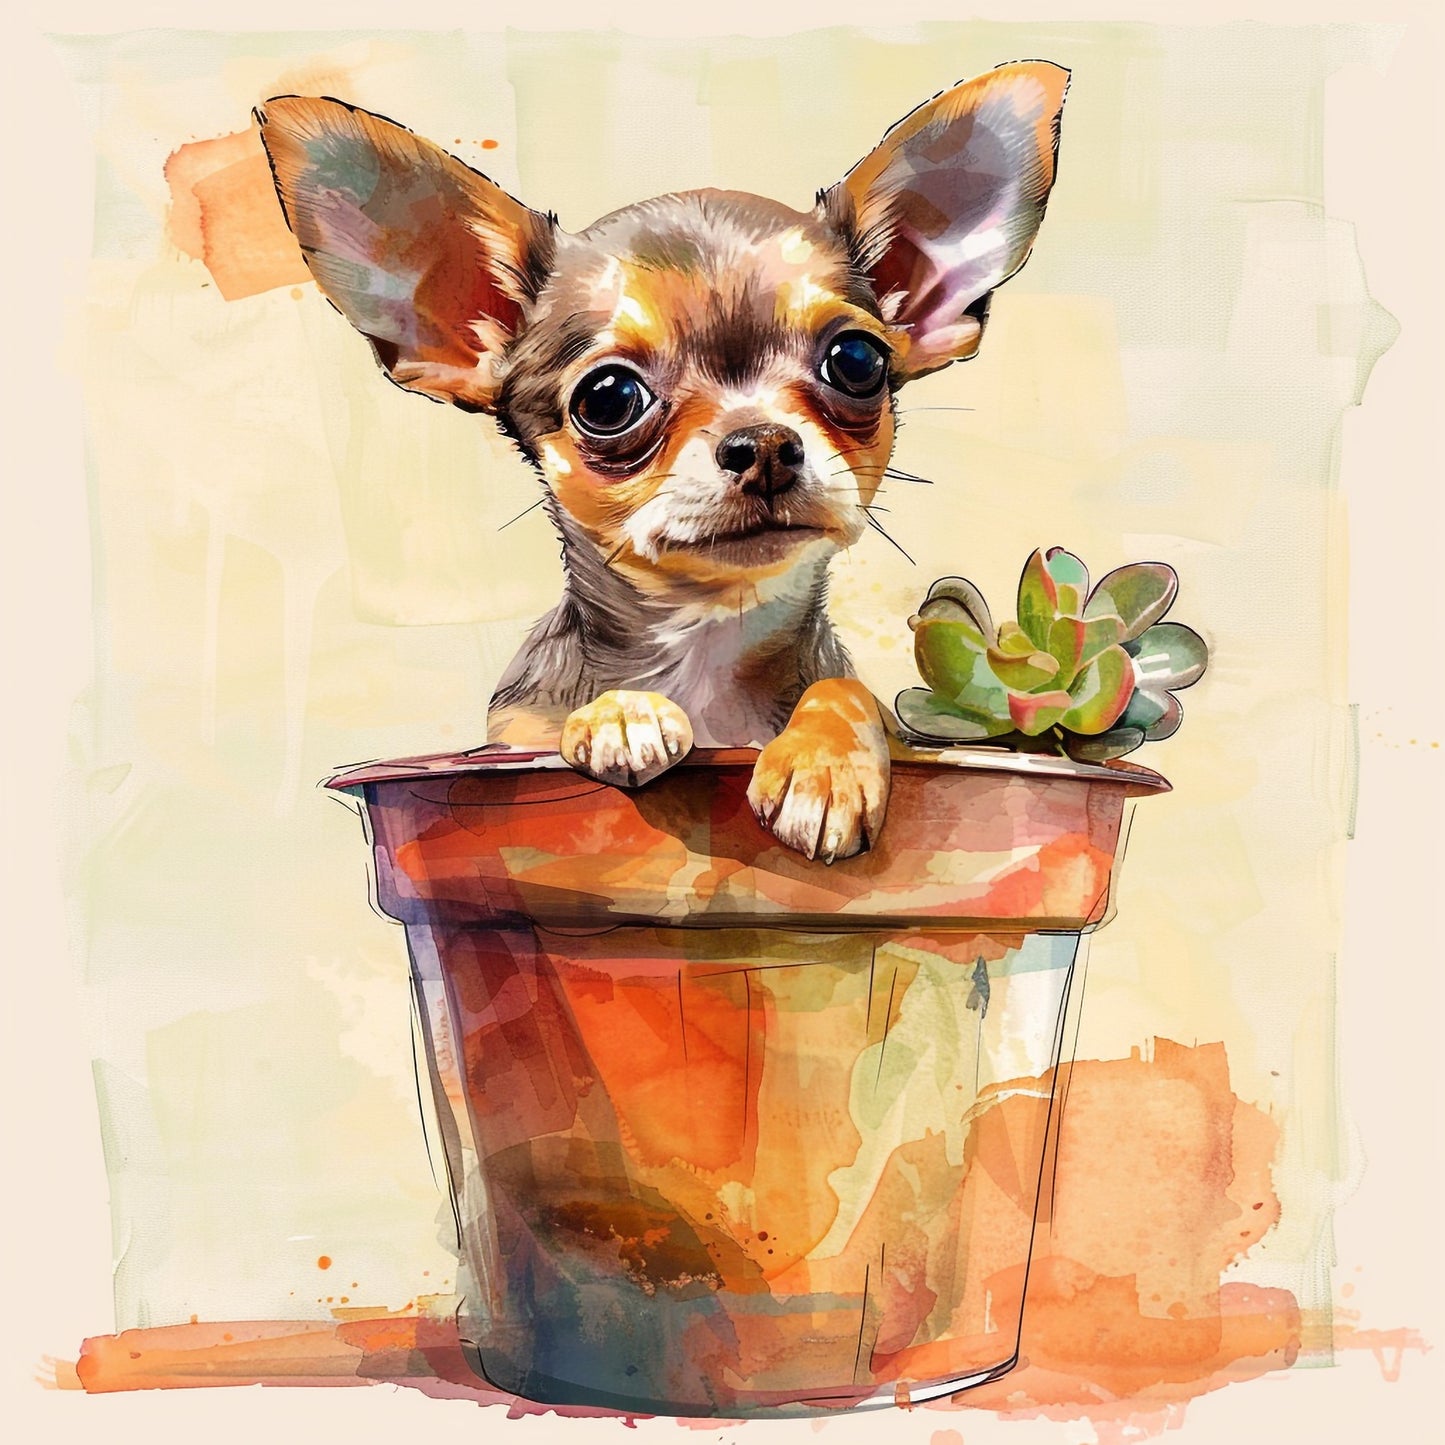 Cute Chihuahua Puppy Playfully Sitting in a Colorful Flower Pot